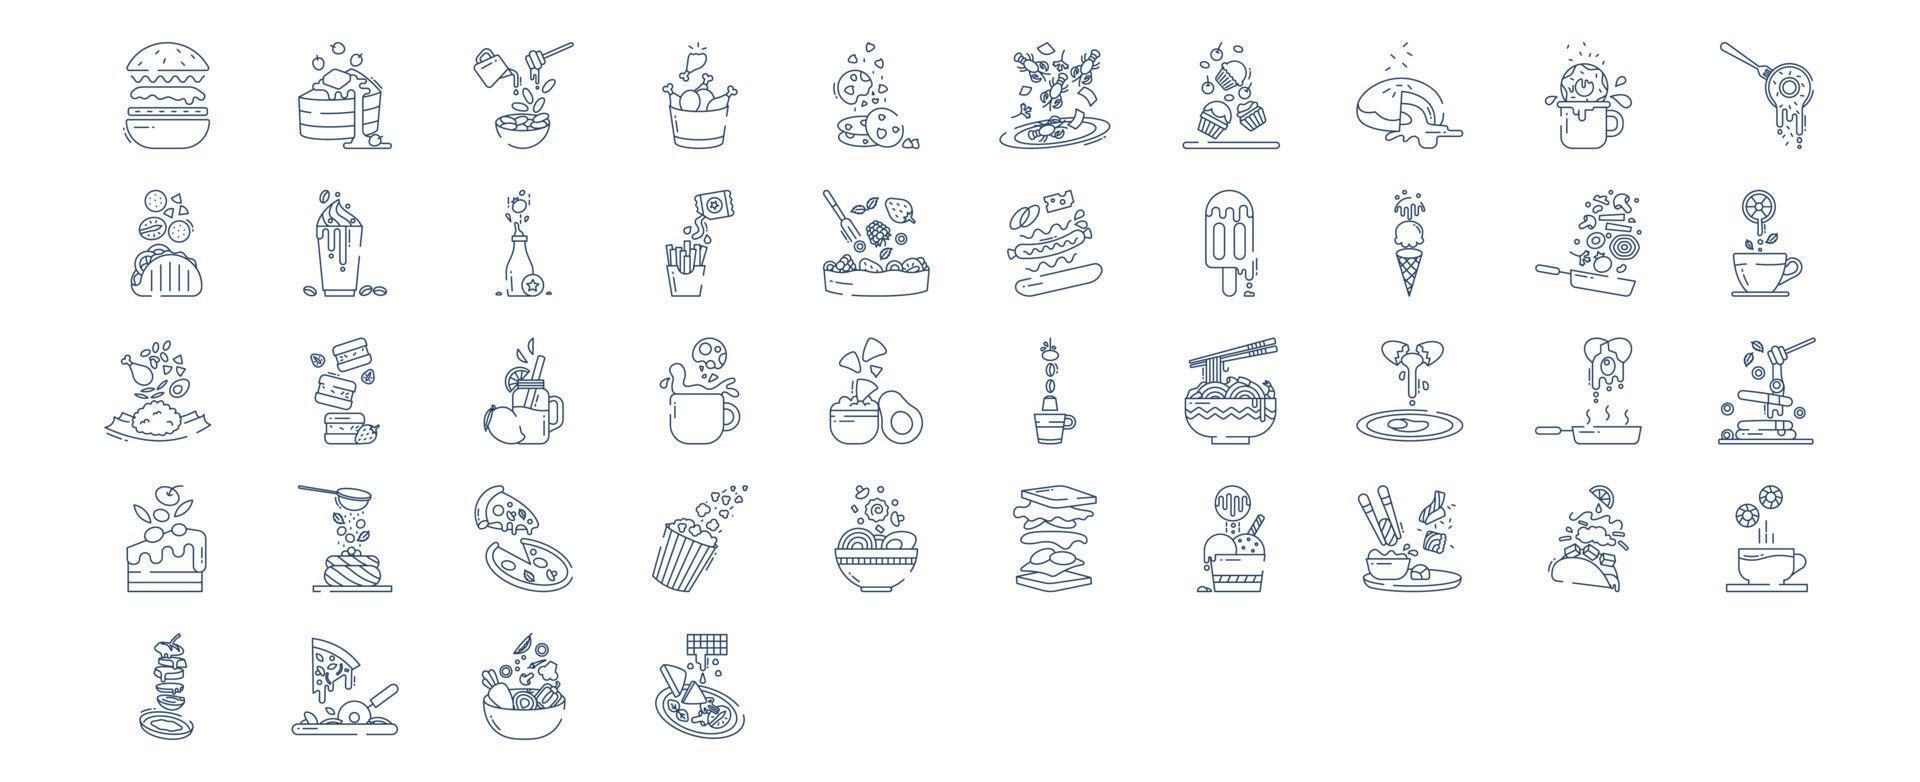 Collection of icons related to Food levitation, including icons like burger, cake, Donut, Noodle and more. vector illustrations, Pixel Perfect set